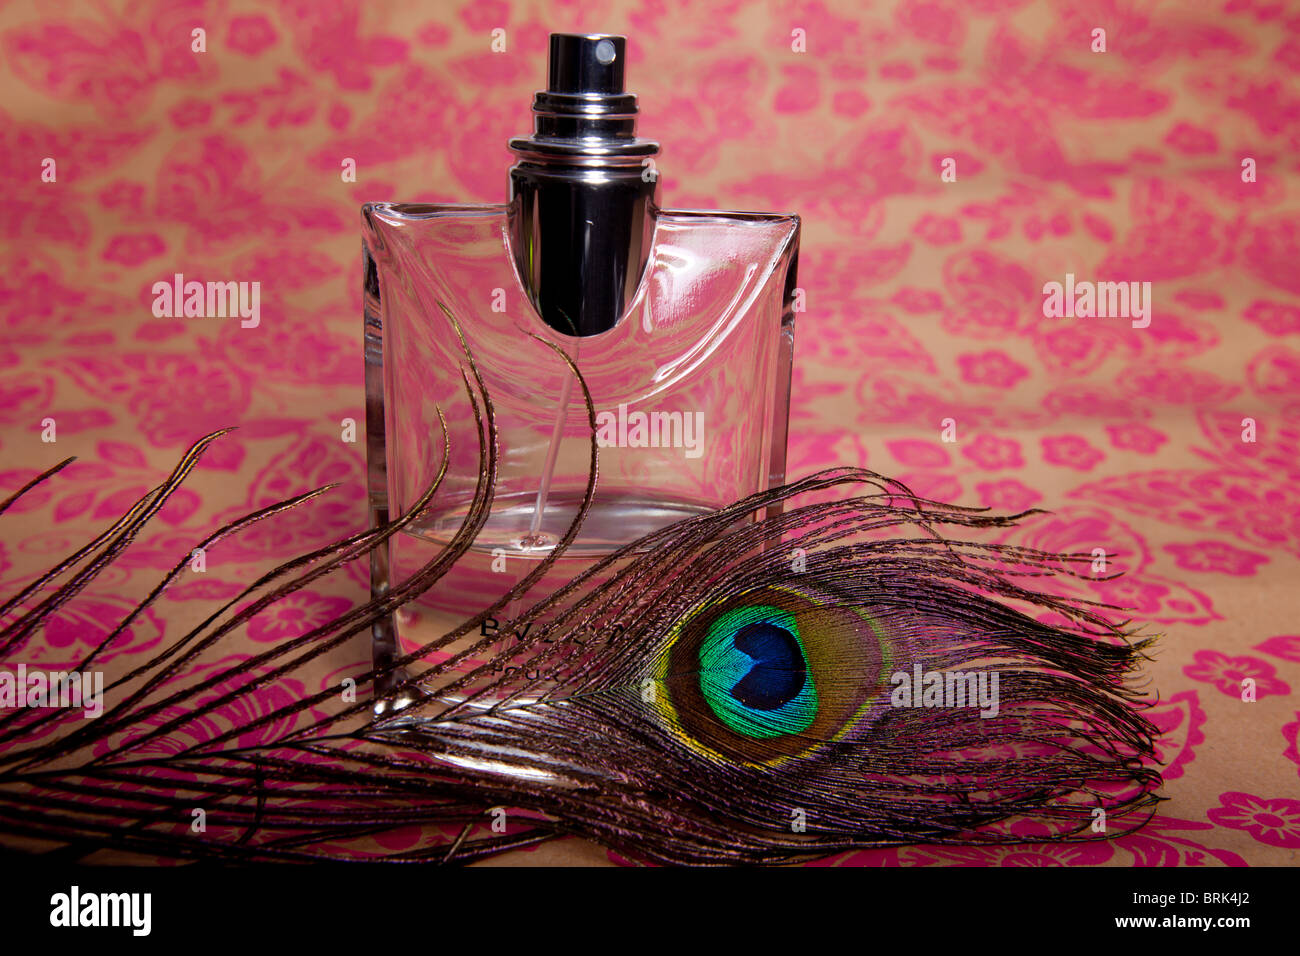 A Perfume Bottle Against A Backdrop Of Floral Wallpaper Stock Photo Alamy